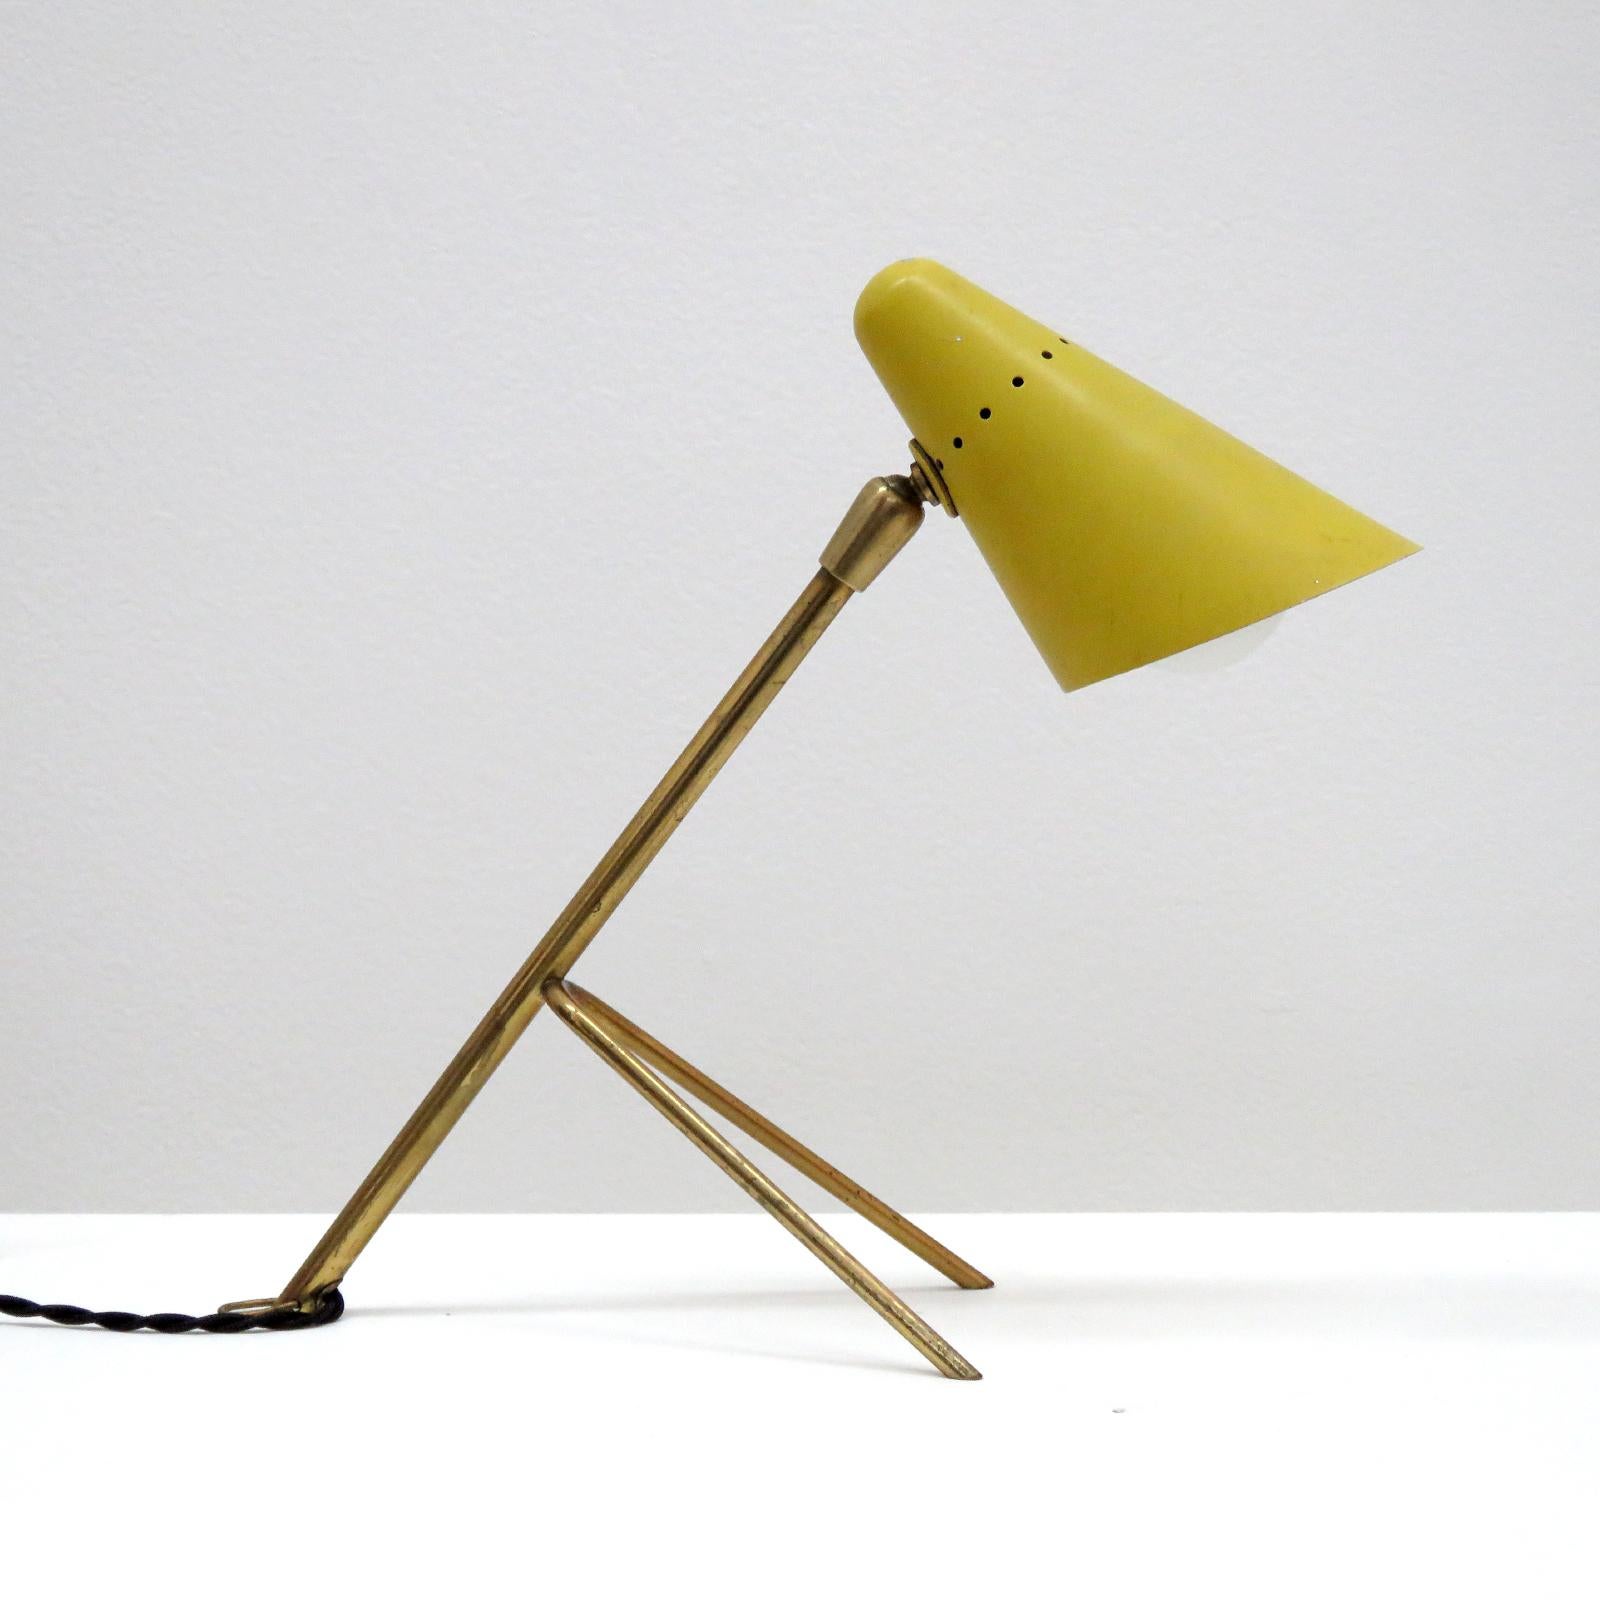 wonderful petite table lamp by Boris Lacroix, brass frame with perforated, enameled hood with perforations, fully adjustable, can be used as a wall lamp as well, wired for US standards, one E14 socket, max. wattage 75w each, bulb provided as a